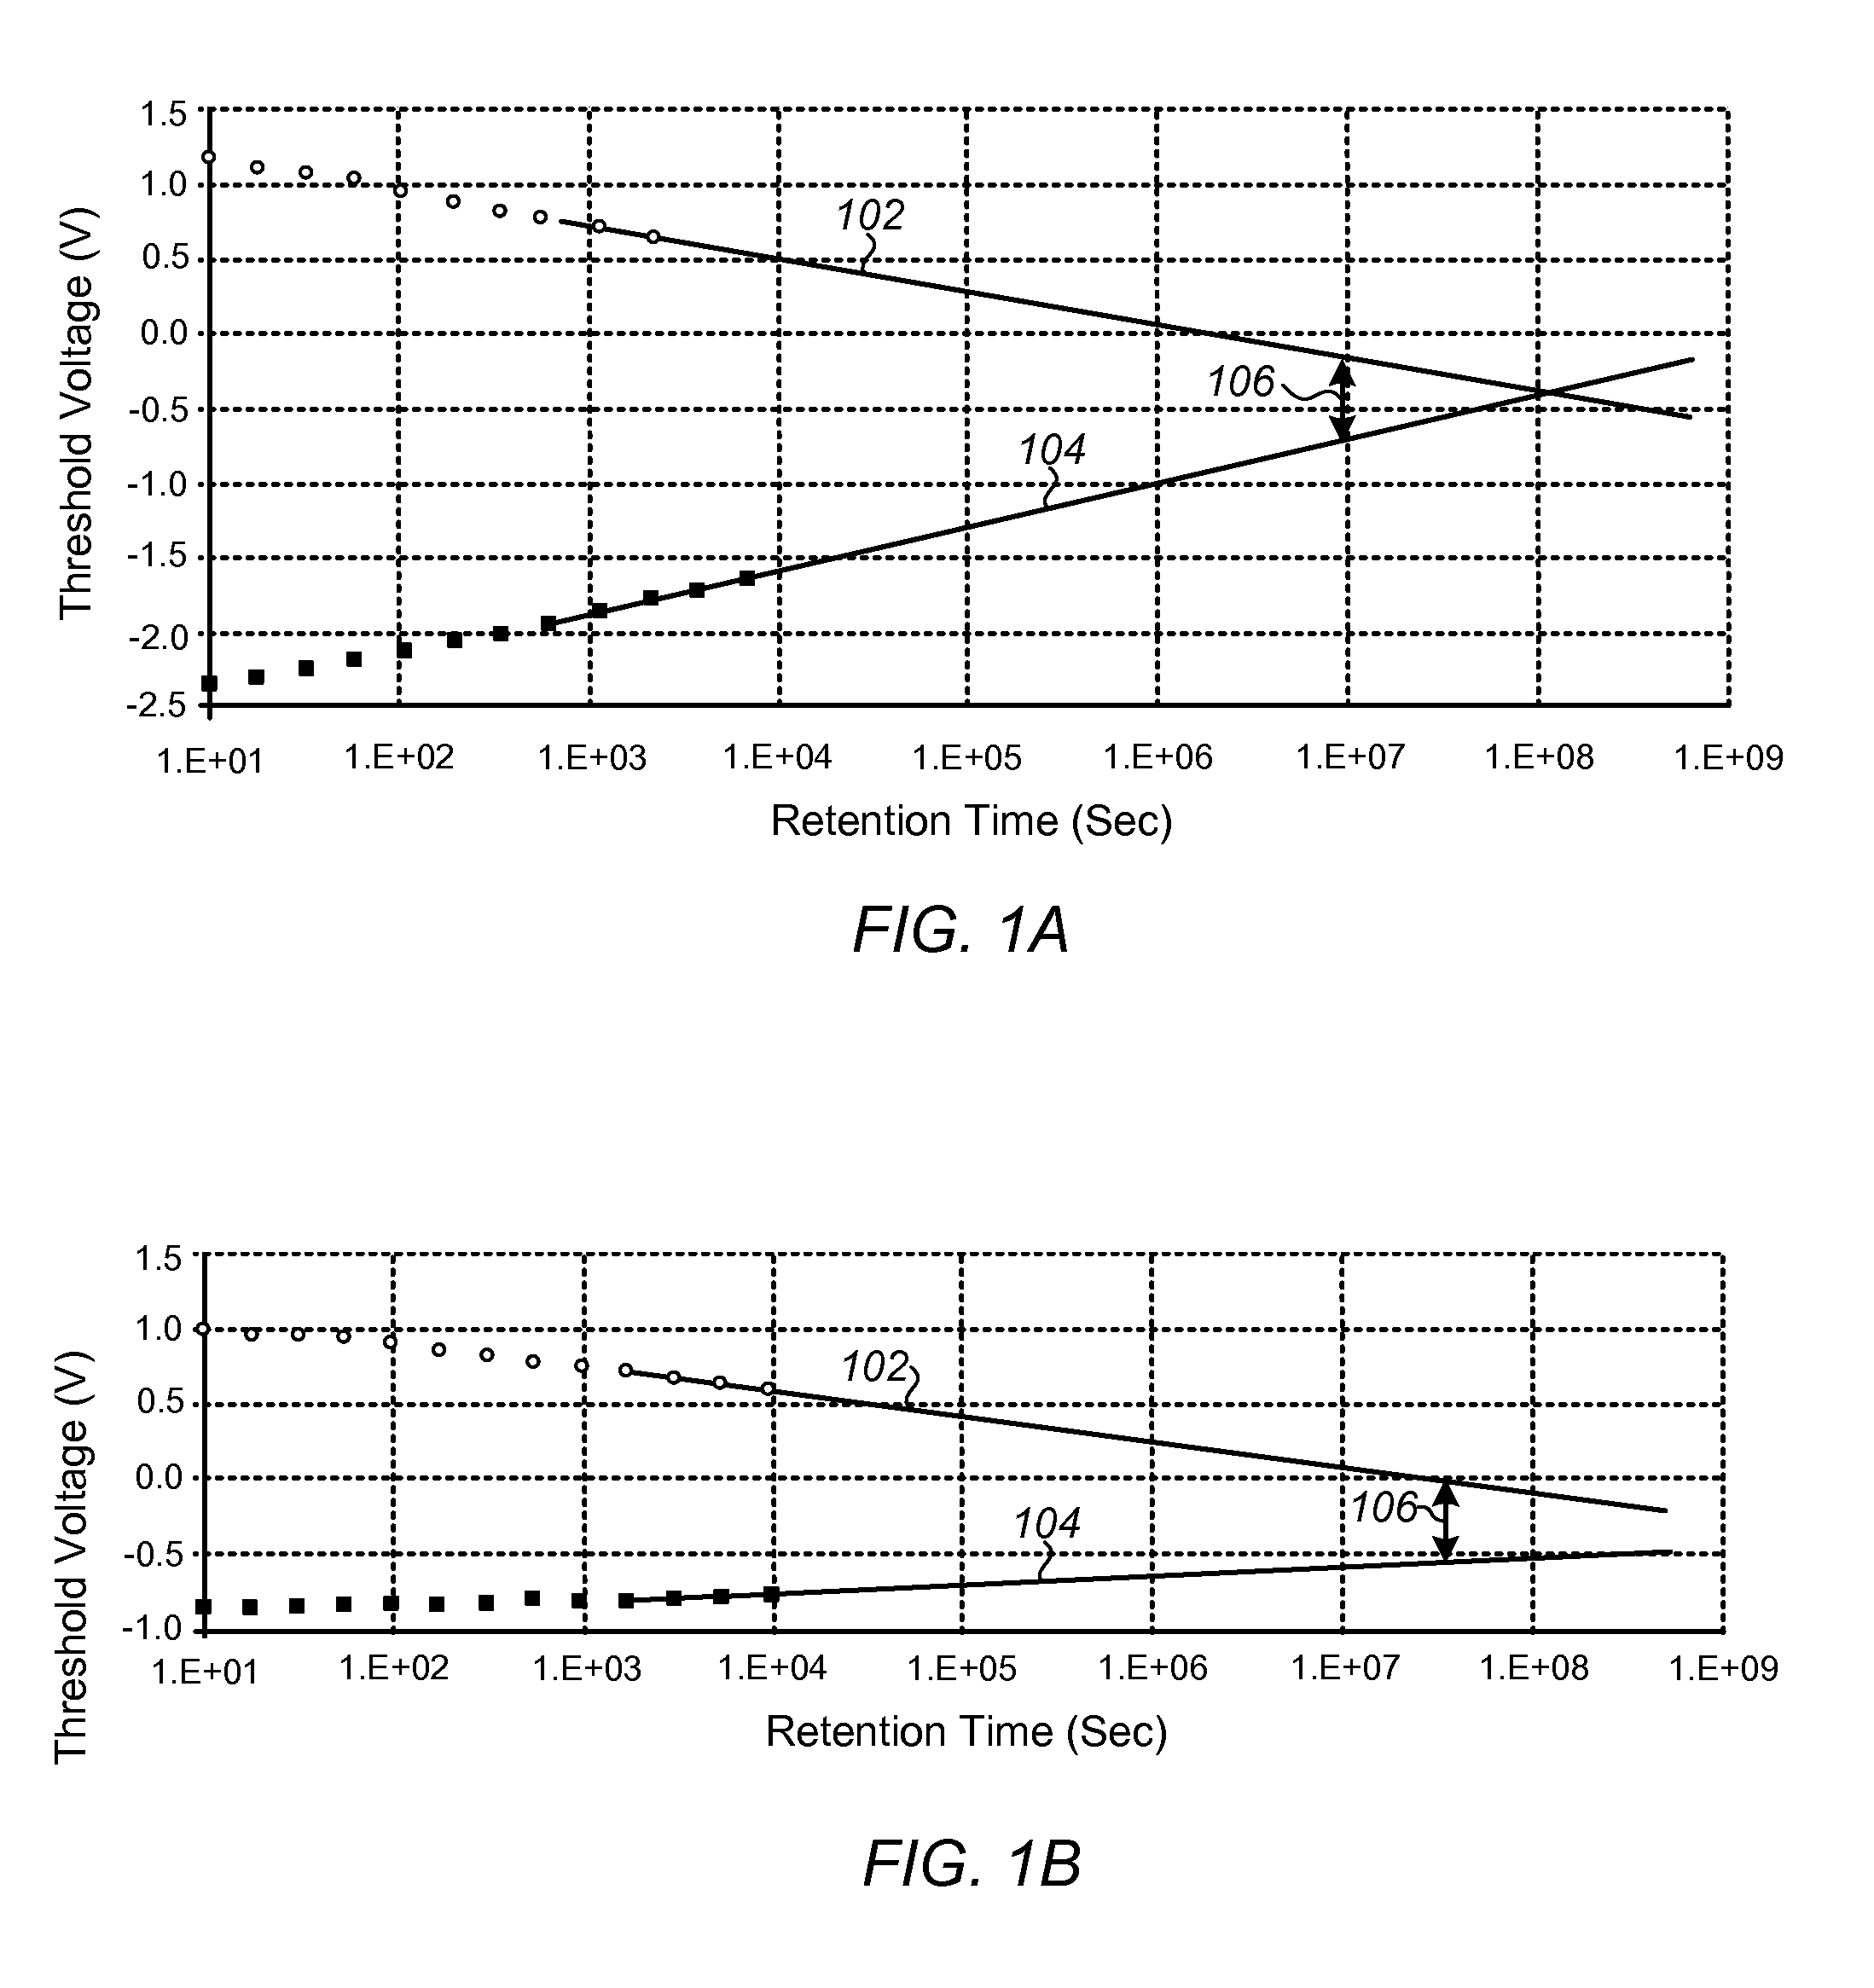 Memory transistor with multiple charge storing layers and a high work function gate electrode